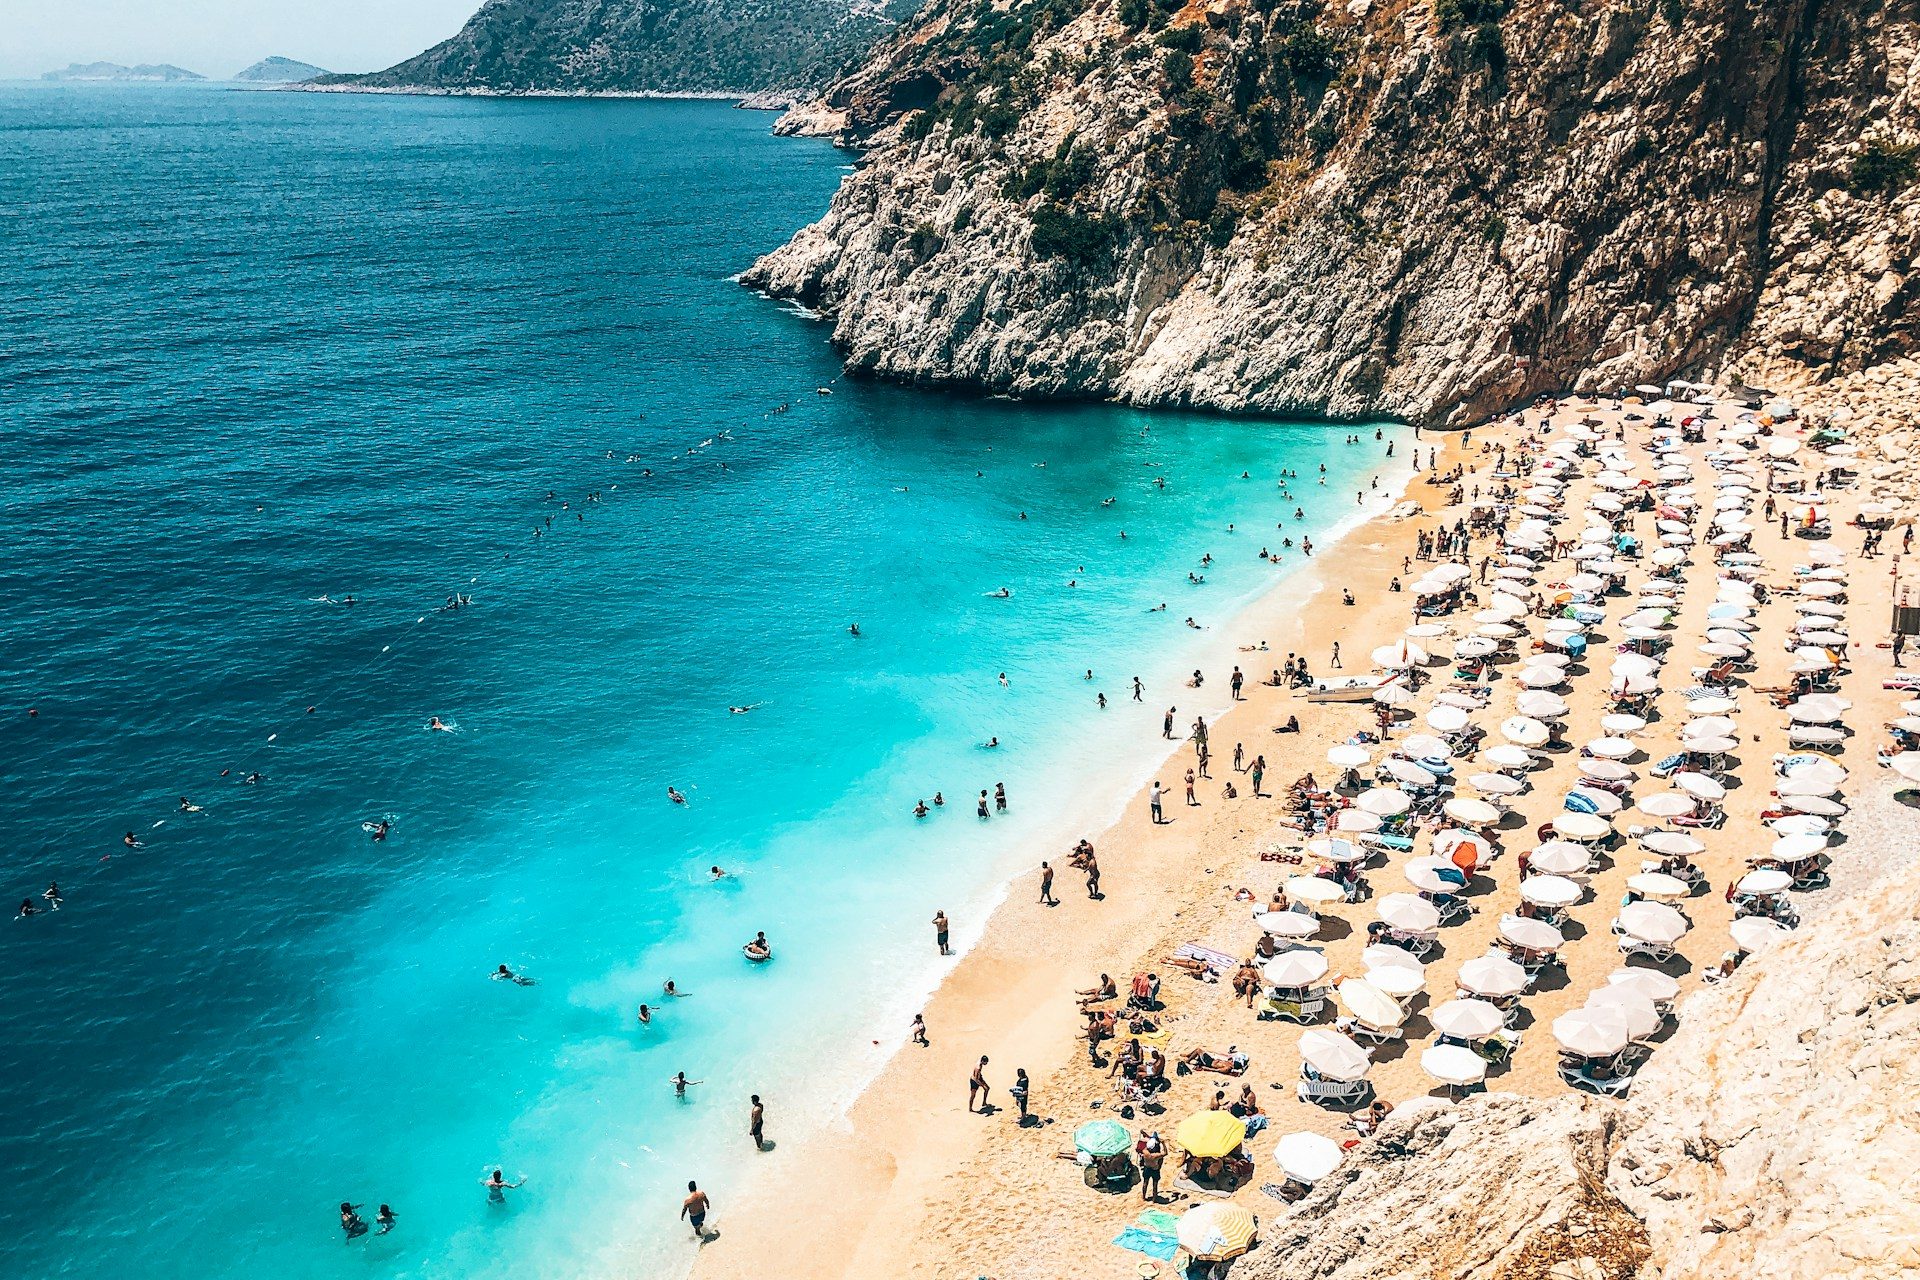 <p>Antalya is one of the coastal cities many tourists choose for their holidays. It has a picturesque old town, beautiful beaches, and a stunning Mediterranean coastline.</p> <p>Image: Afif Zafrak / Unsplash</p>